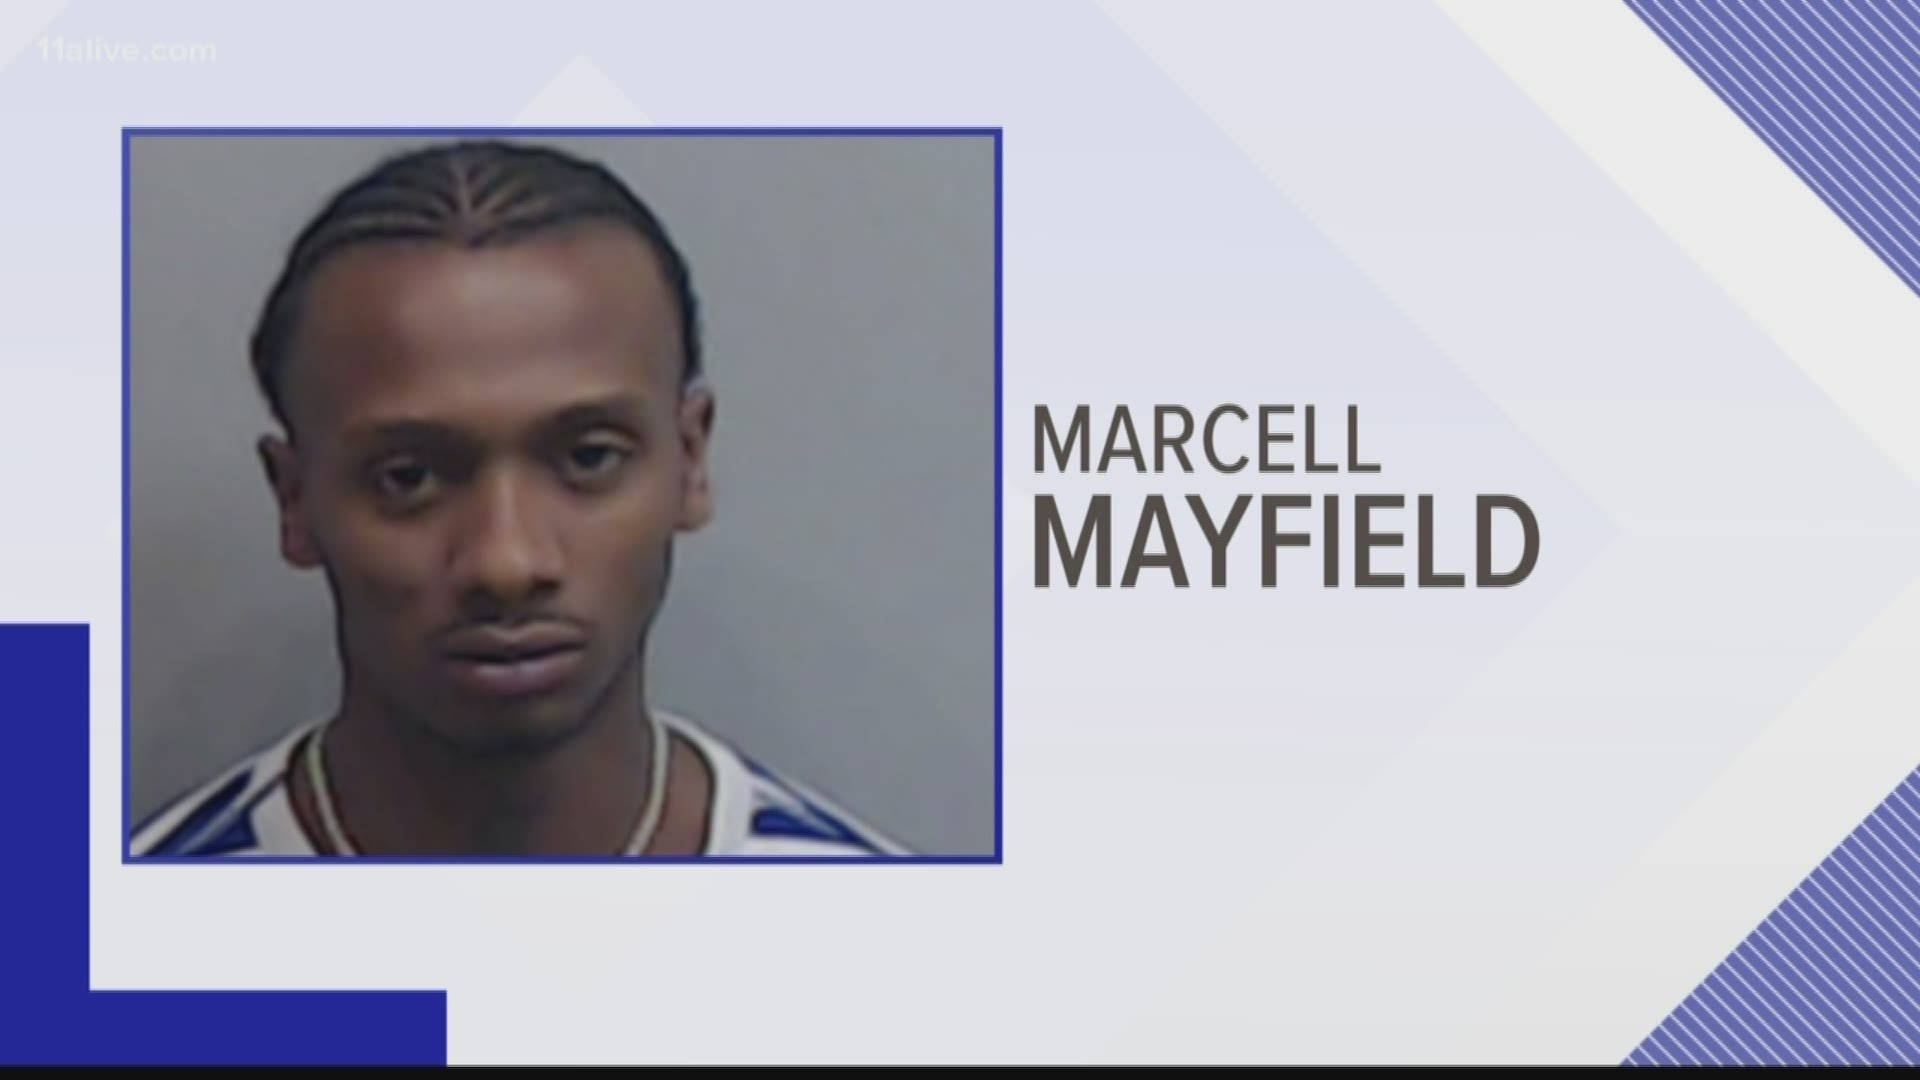 Atlanta Police said they've charged 29-year-old Marcell Mayfield on three counts of aggravated assault with the intent to commit murder.